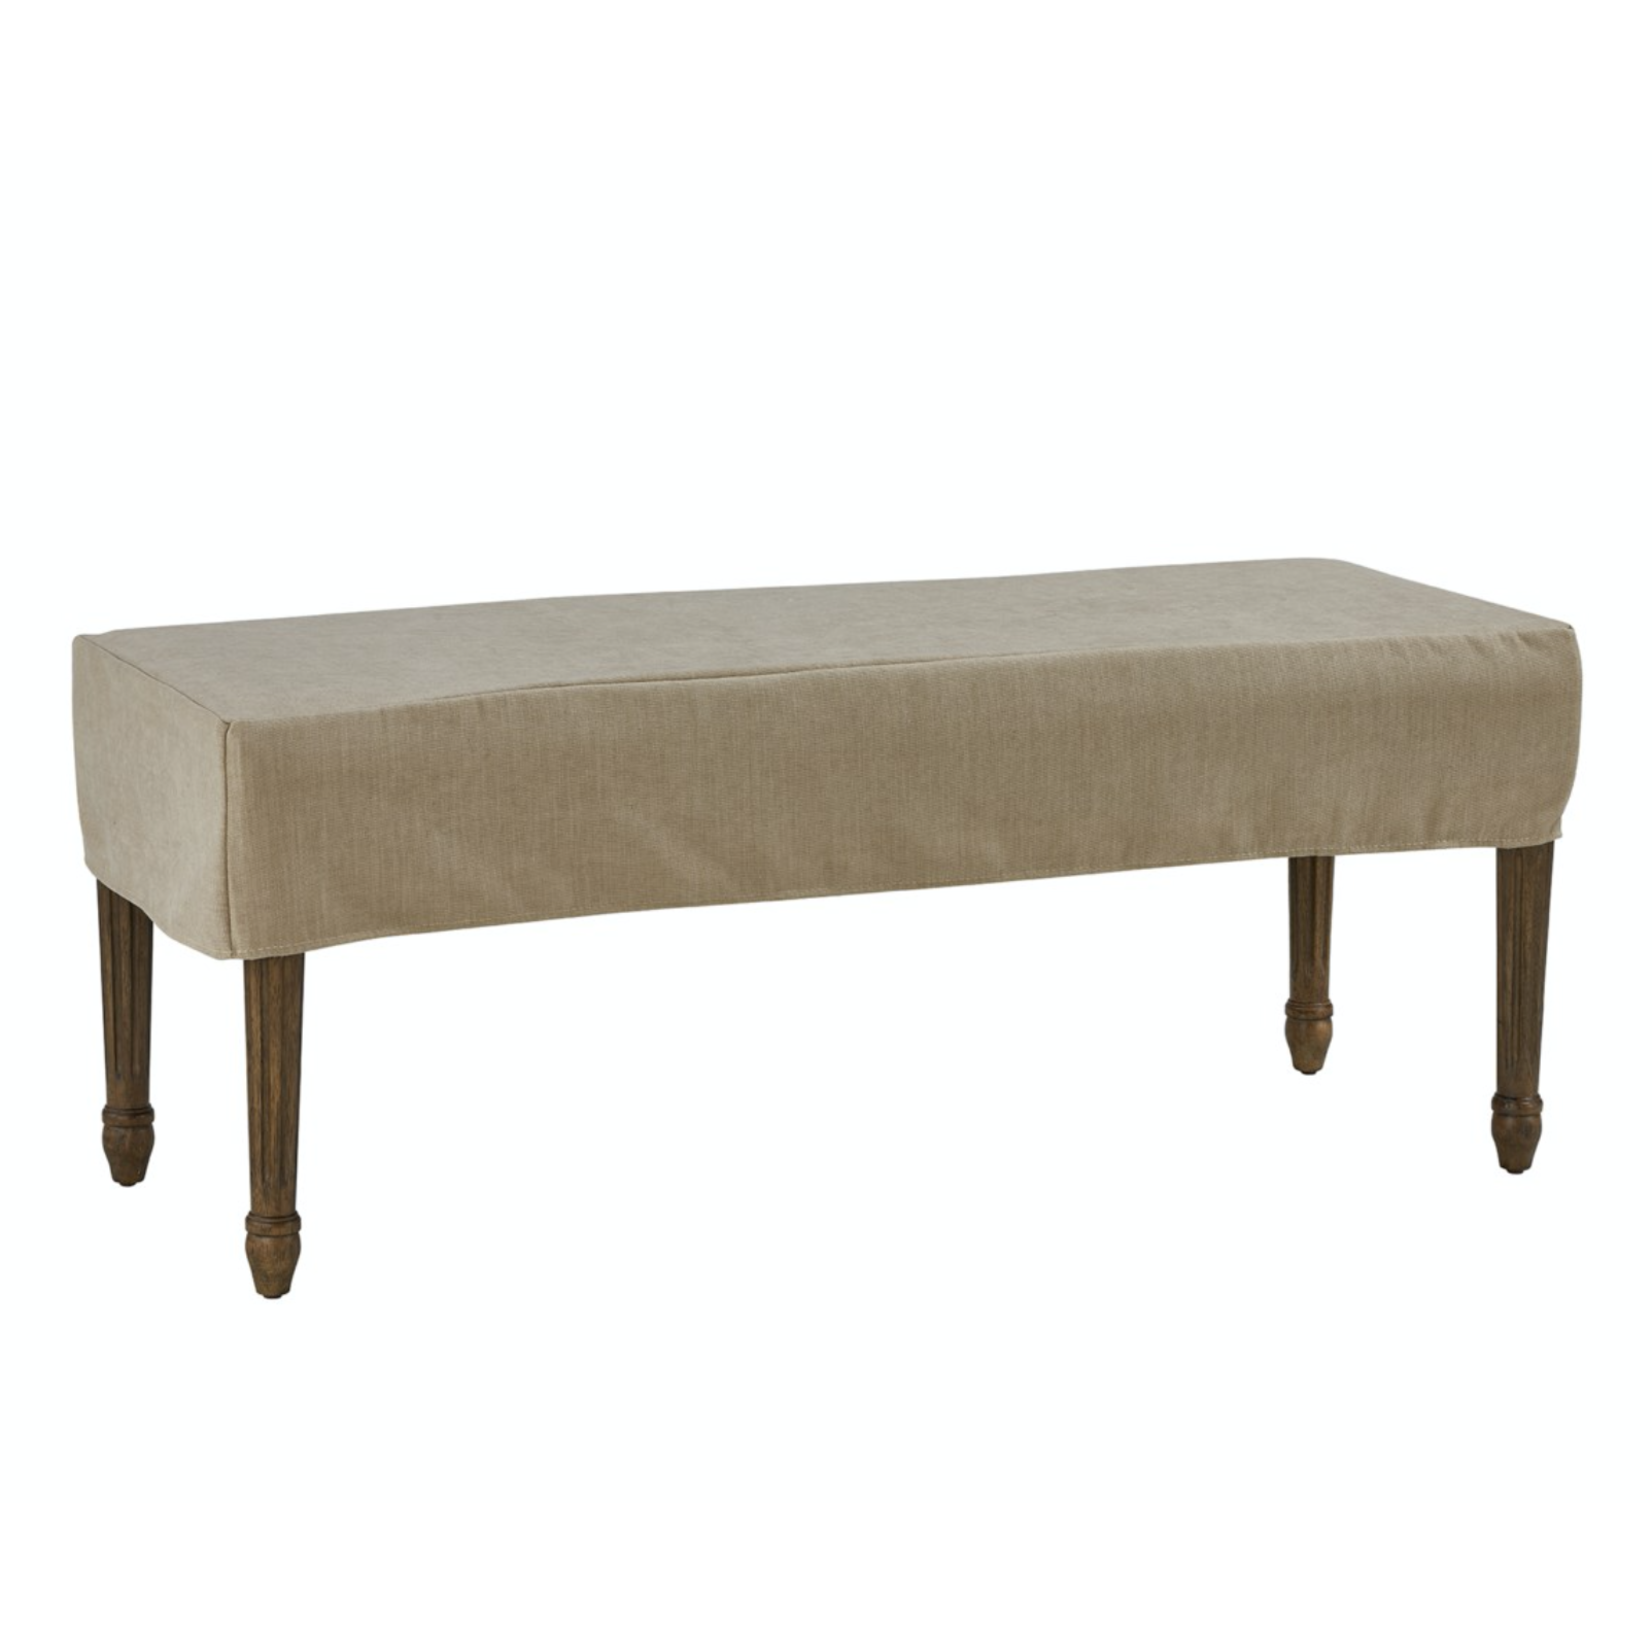 Outside The Box 49x19x8 Oatmeal Washable Reversible Dining Bench Slipcover